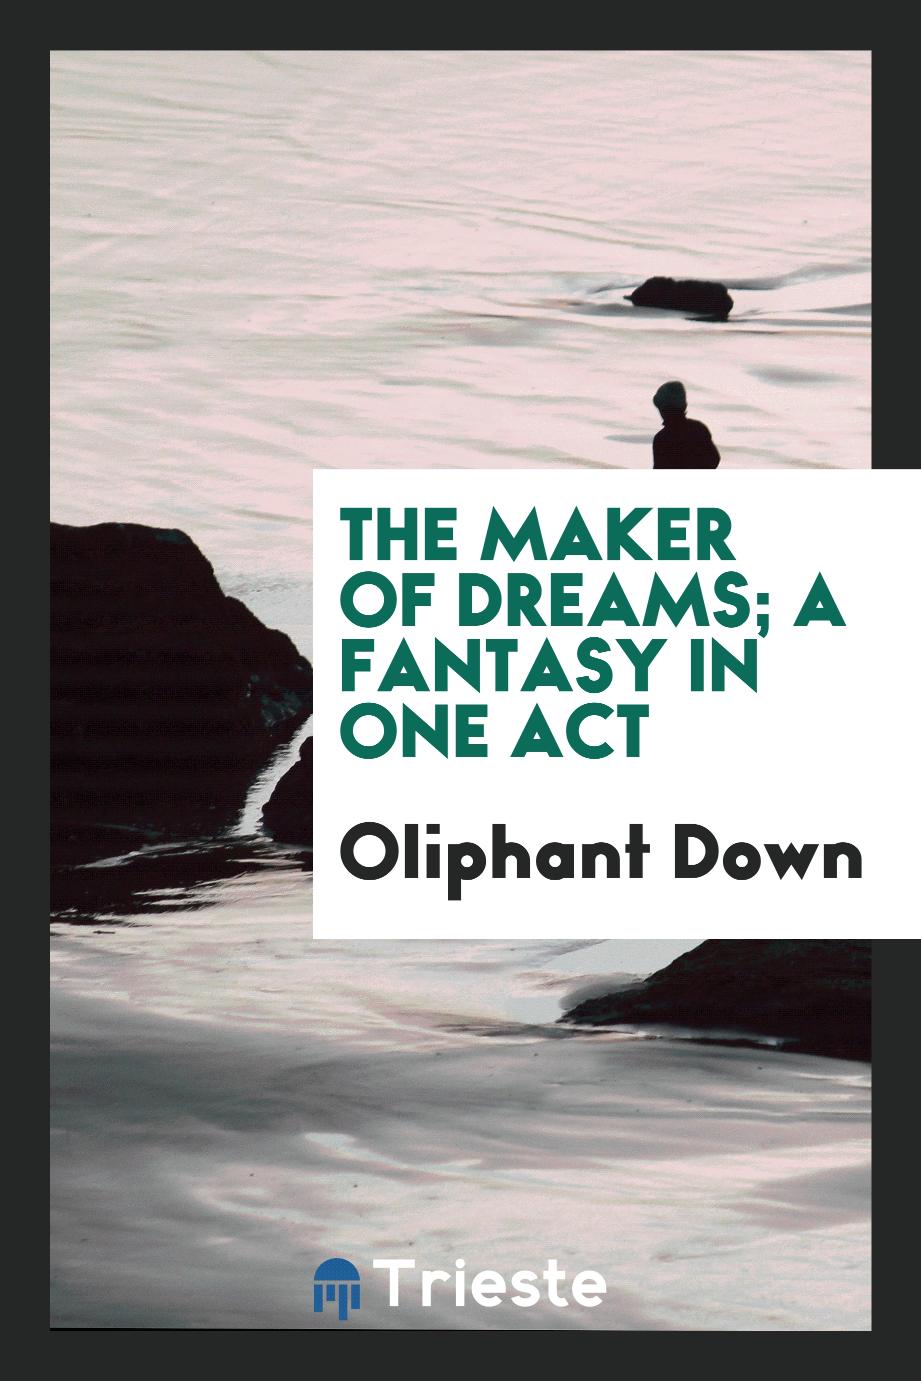 Oliphant Down - The maker of dreams; a fantasy in one act